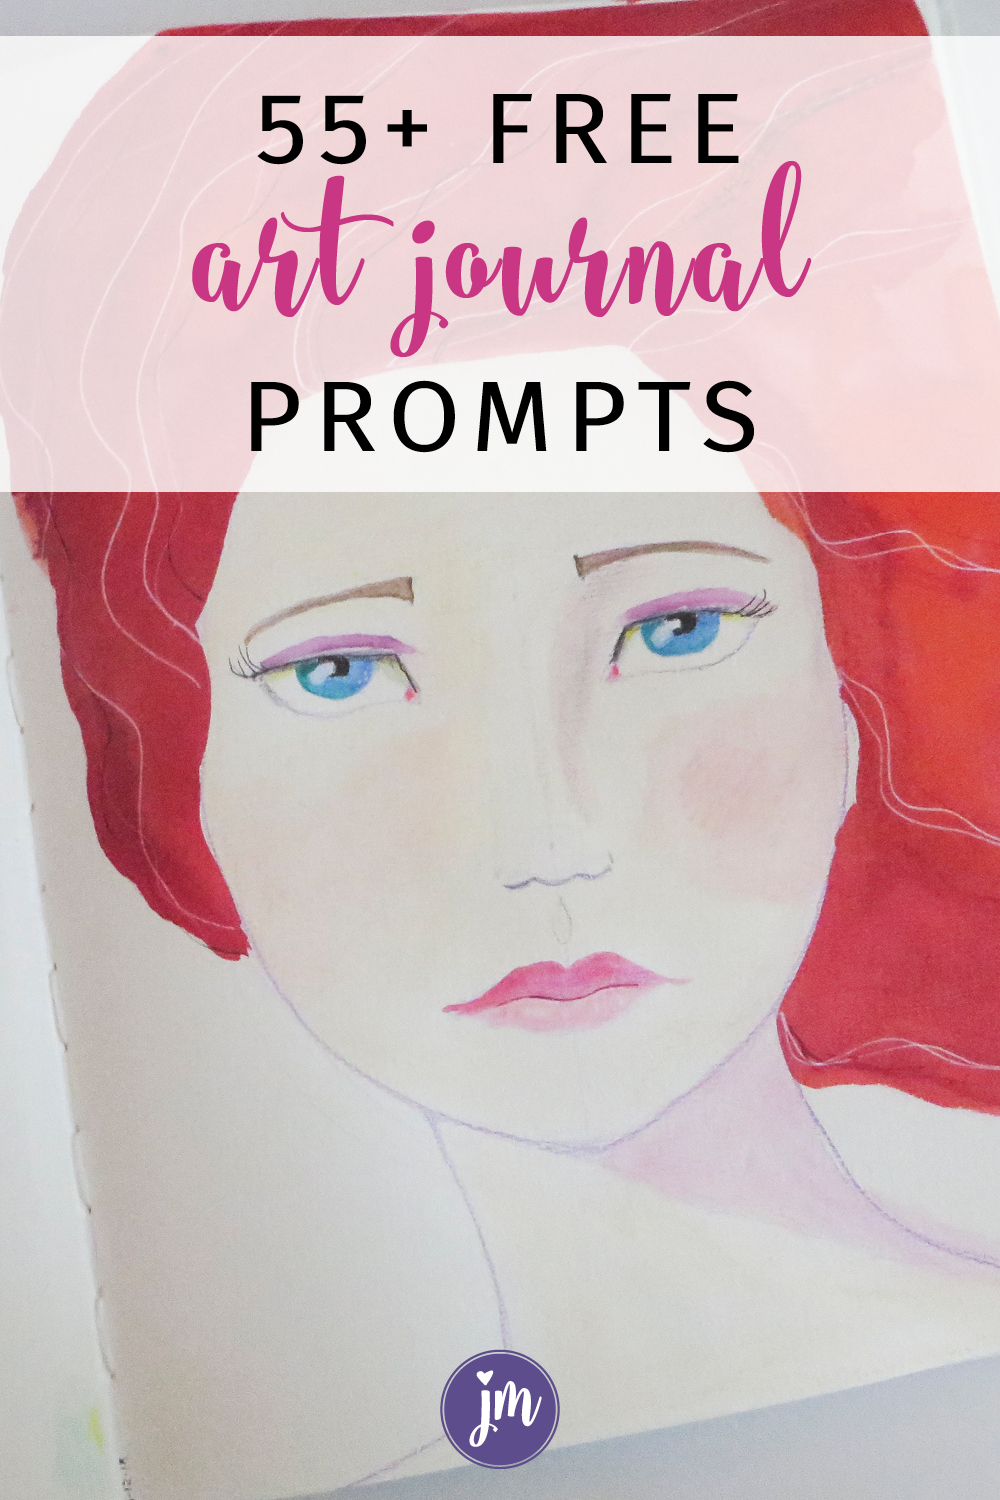 These free art journal prompts are a great way to stretch yourself creatively! I love all the ideas in this post; it made me want to grab my art journal and play! #artjournalprompts